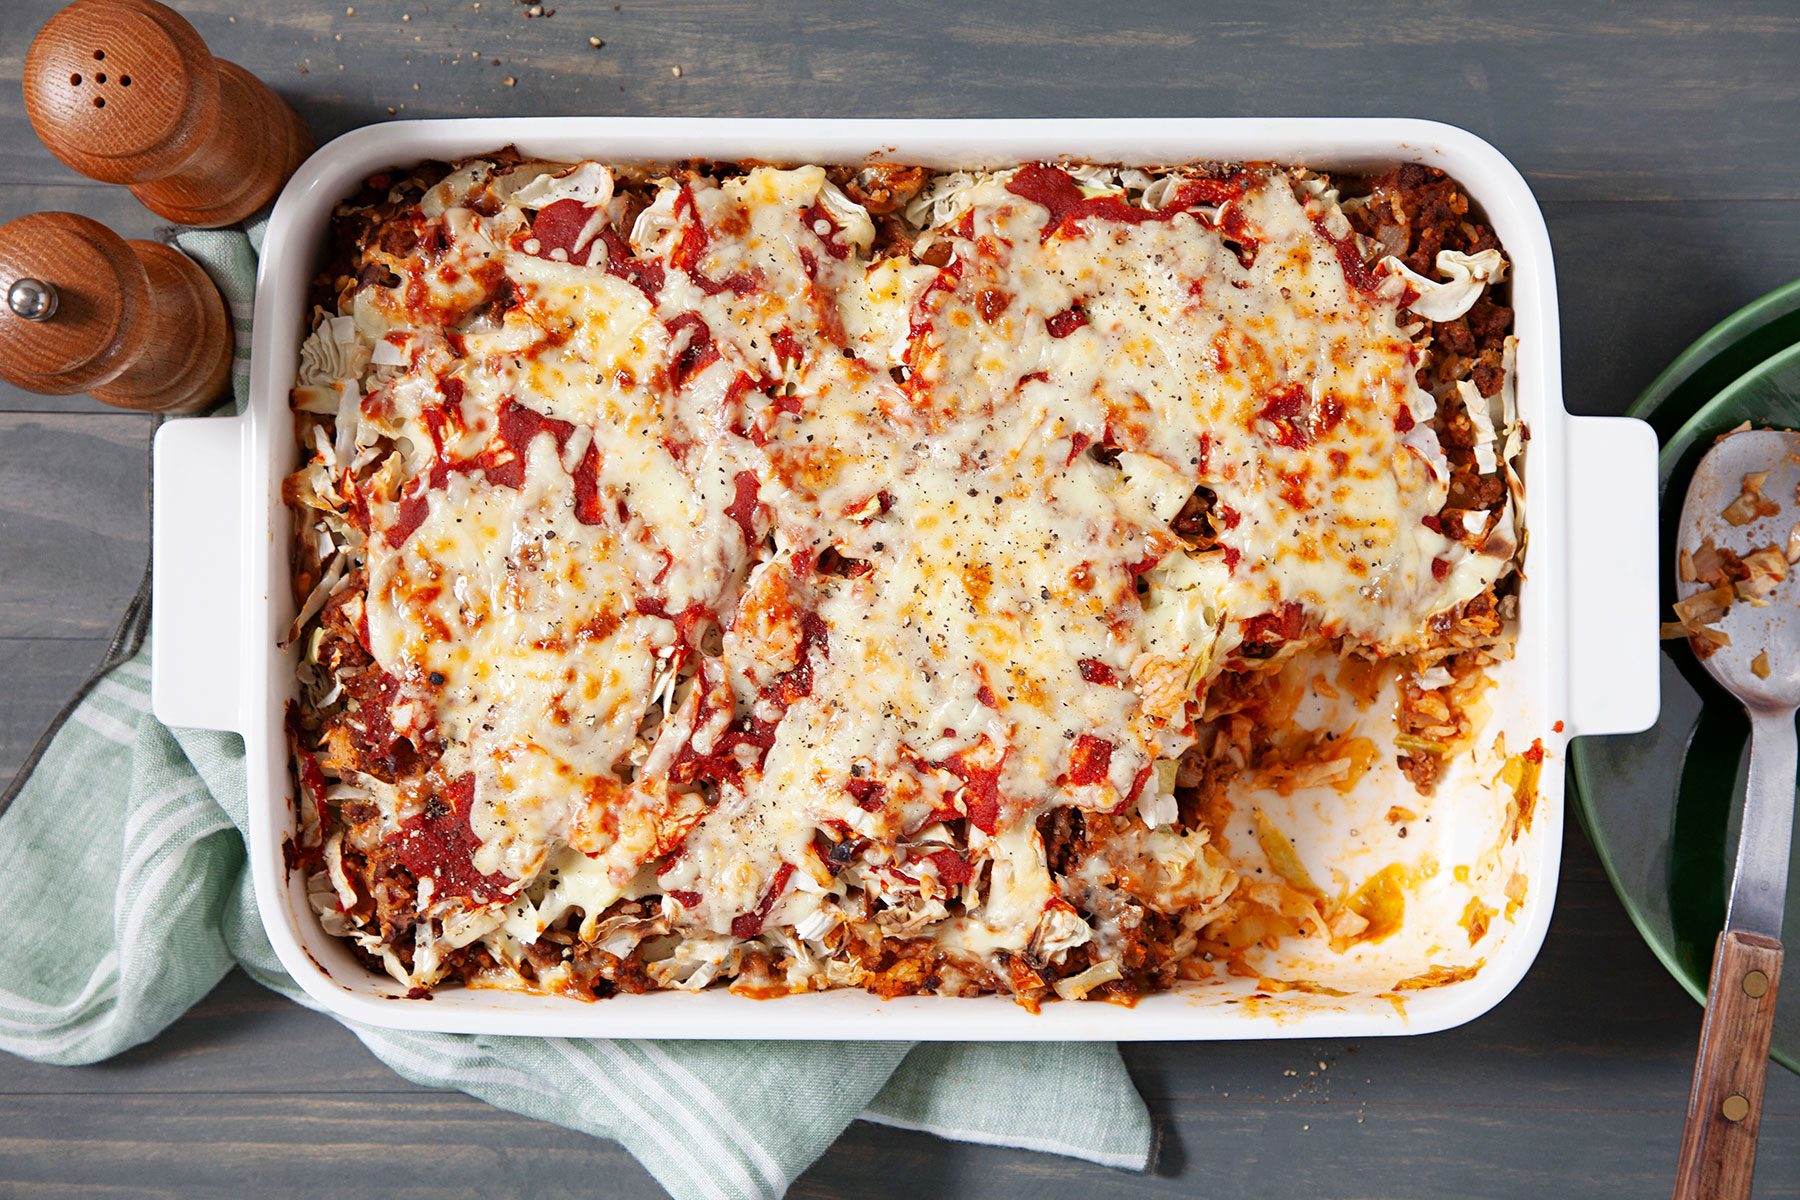 Cabbage Roll Casserole Recipe: How to Make It